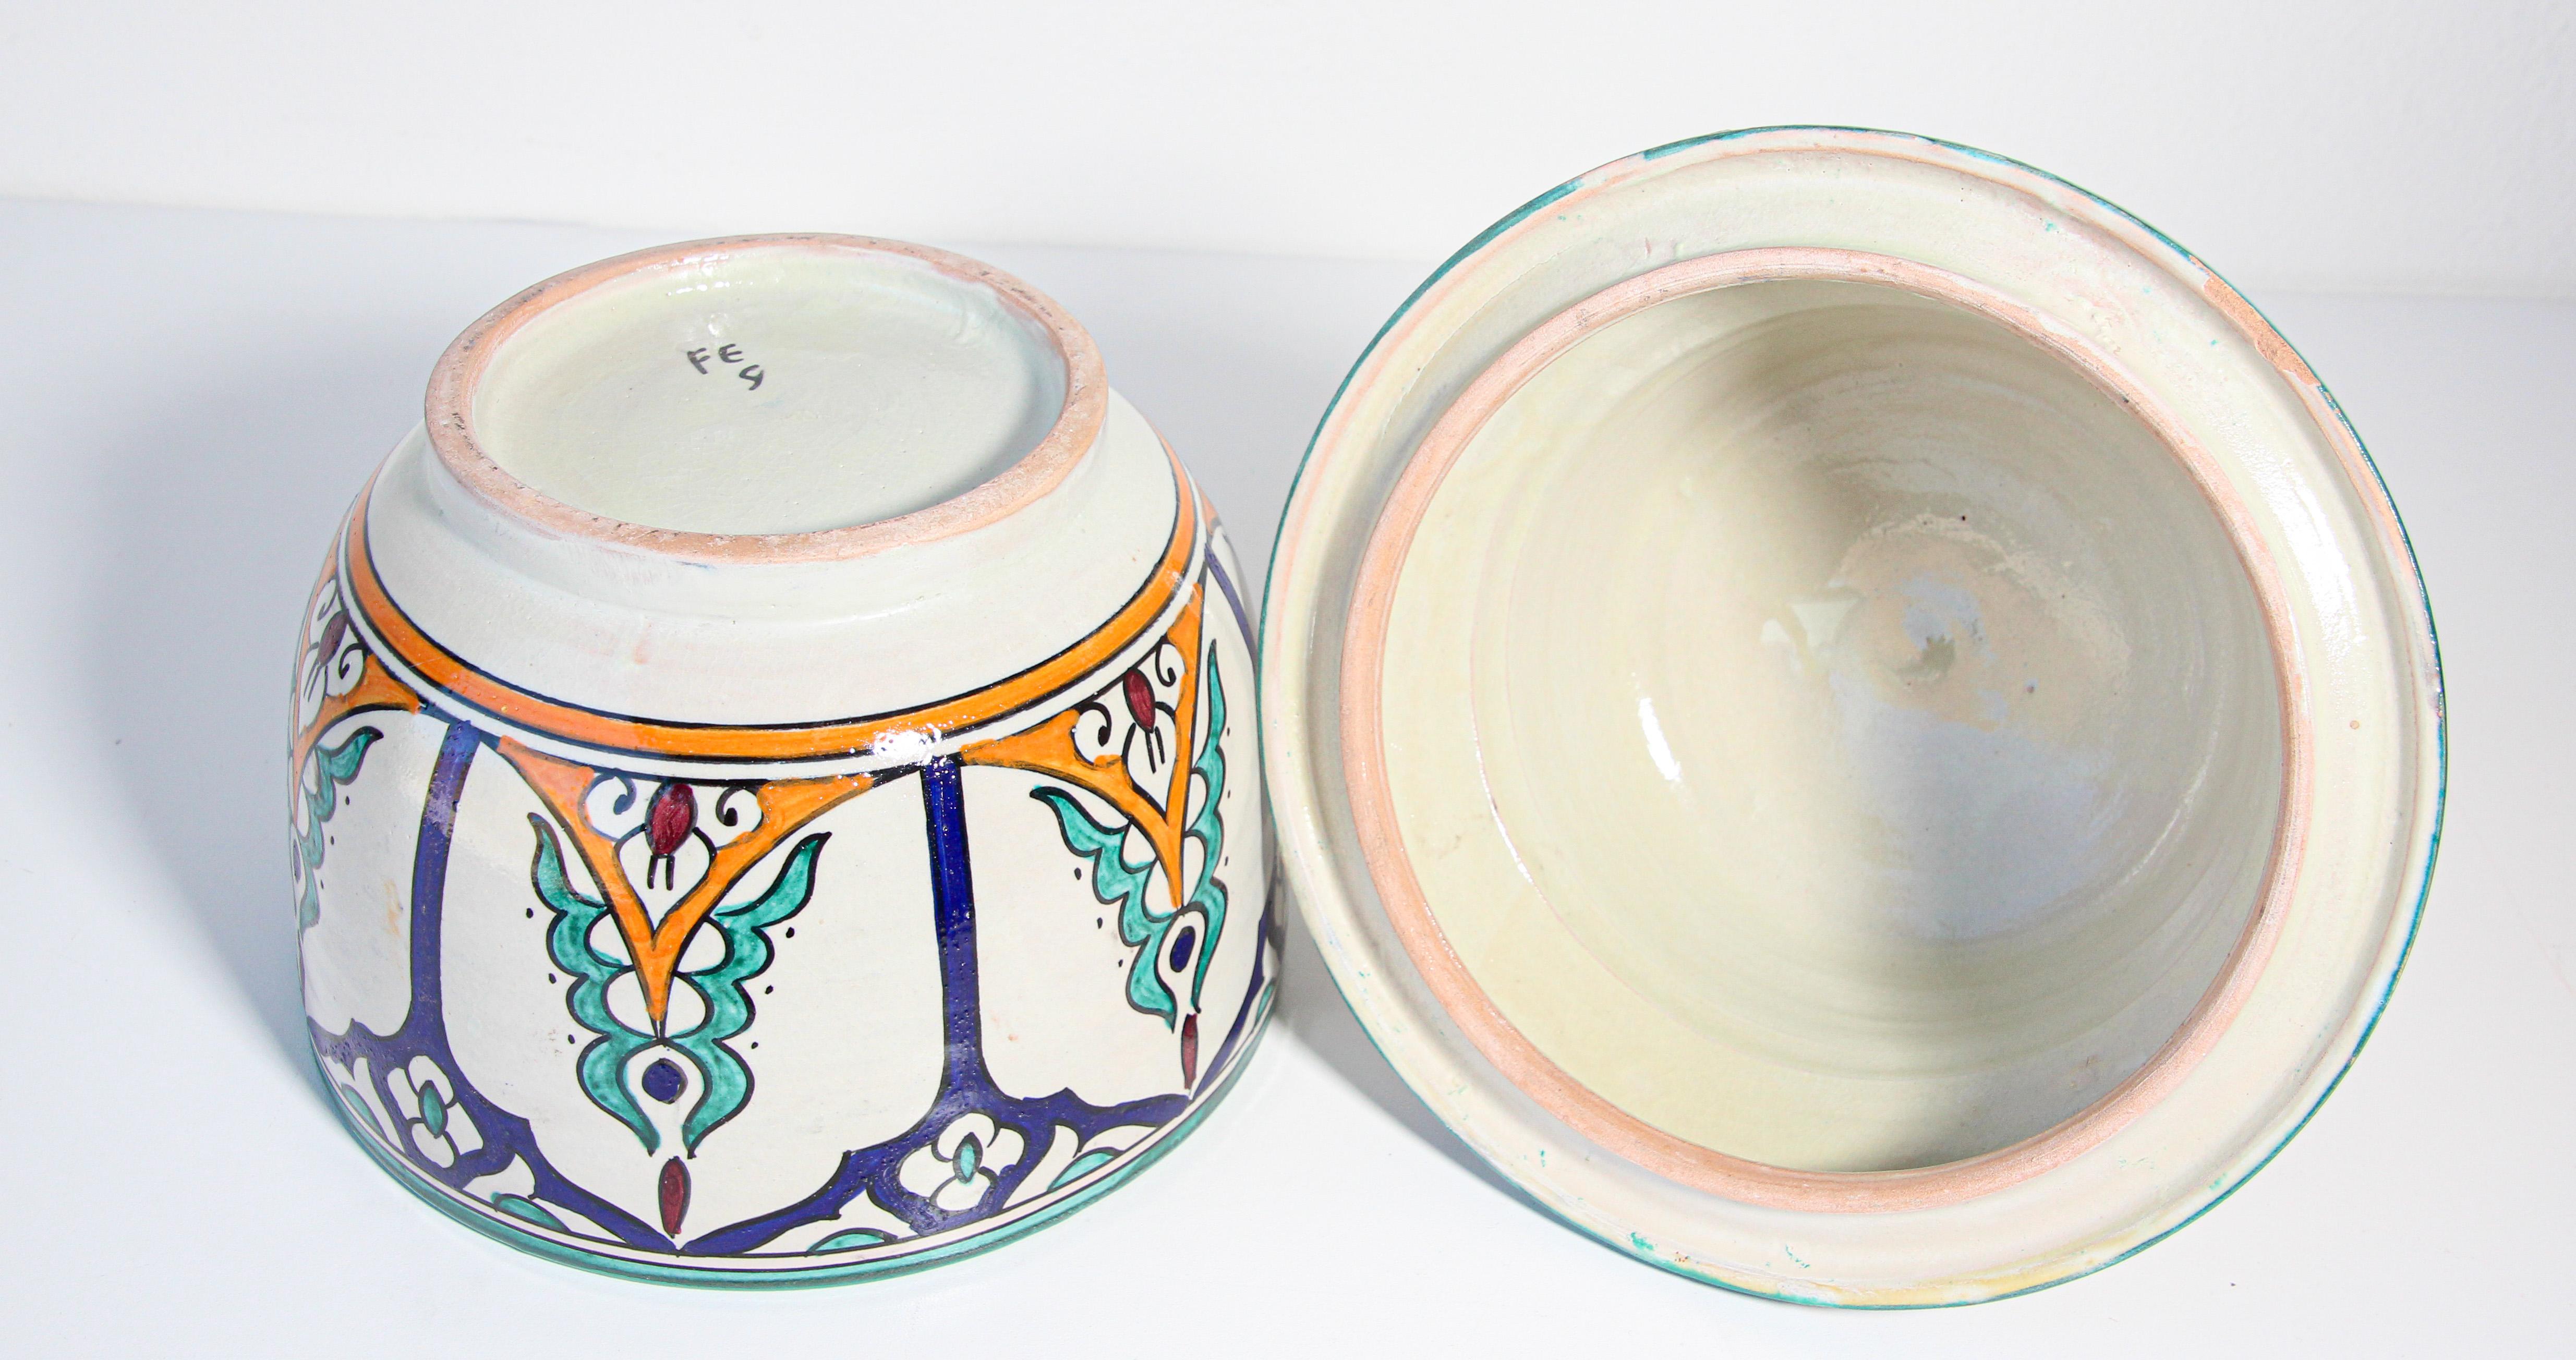 20th Century Moorish Ceramic Glazed Covered Jars Handcrafted in Fez Morocco For Sale